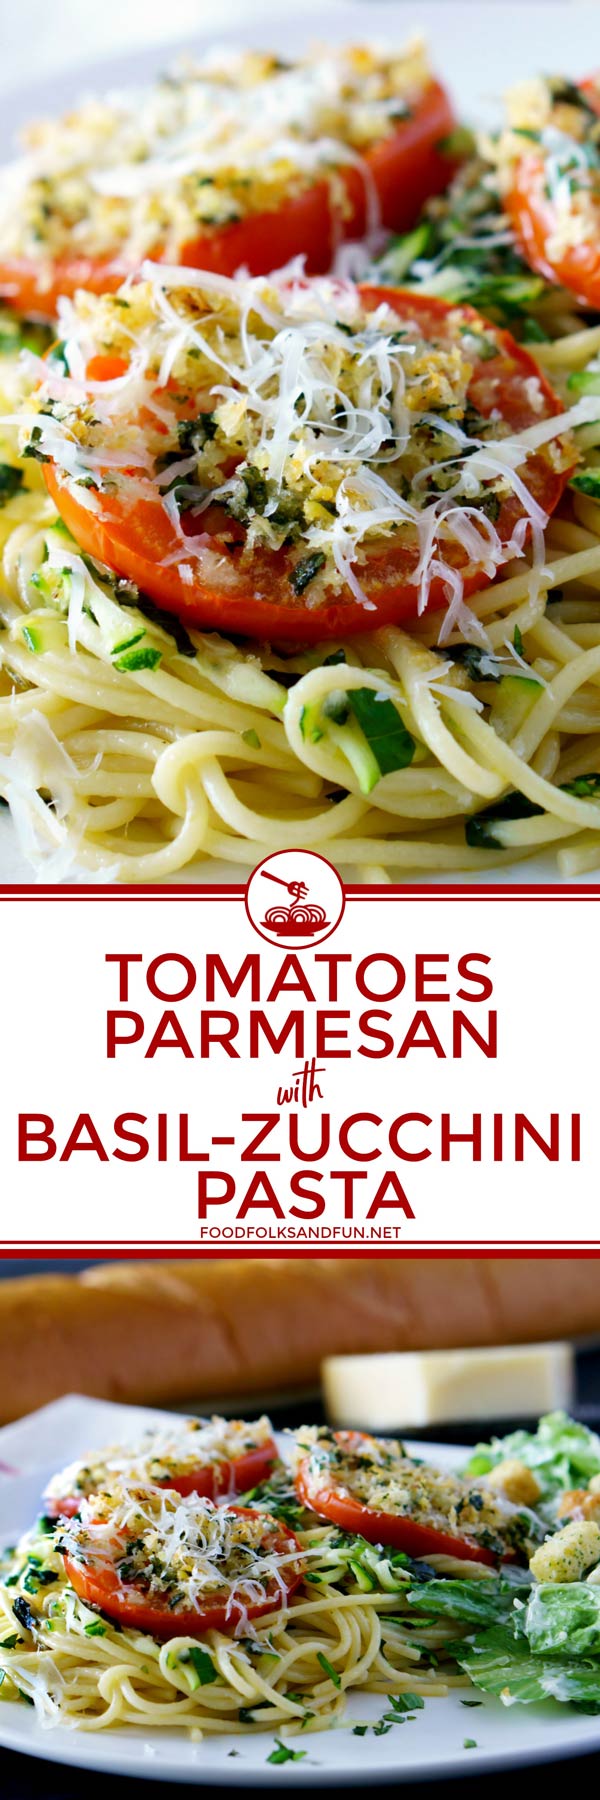 Best Bakes Tomatoes Parmesan with Basil Zucchini Pasta